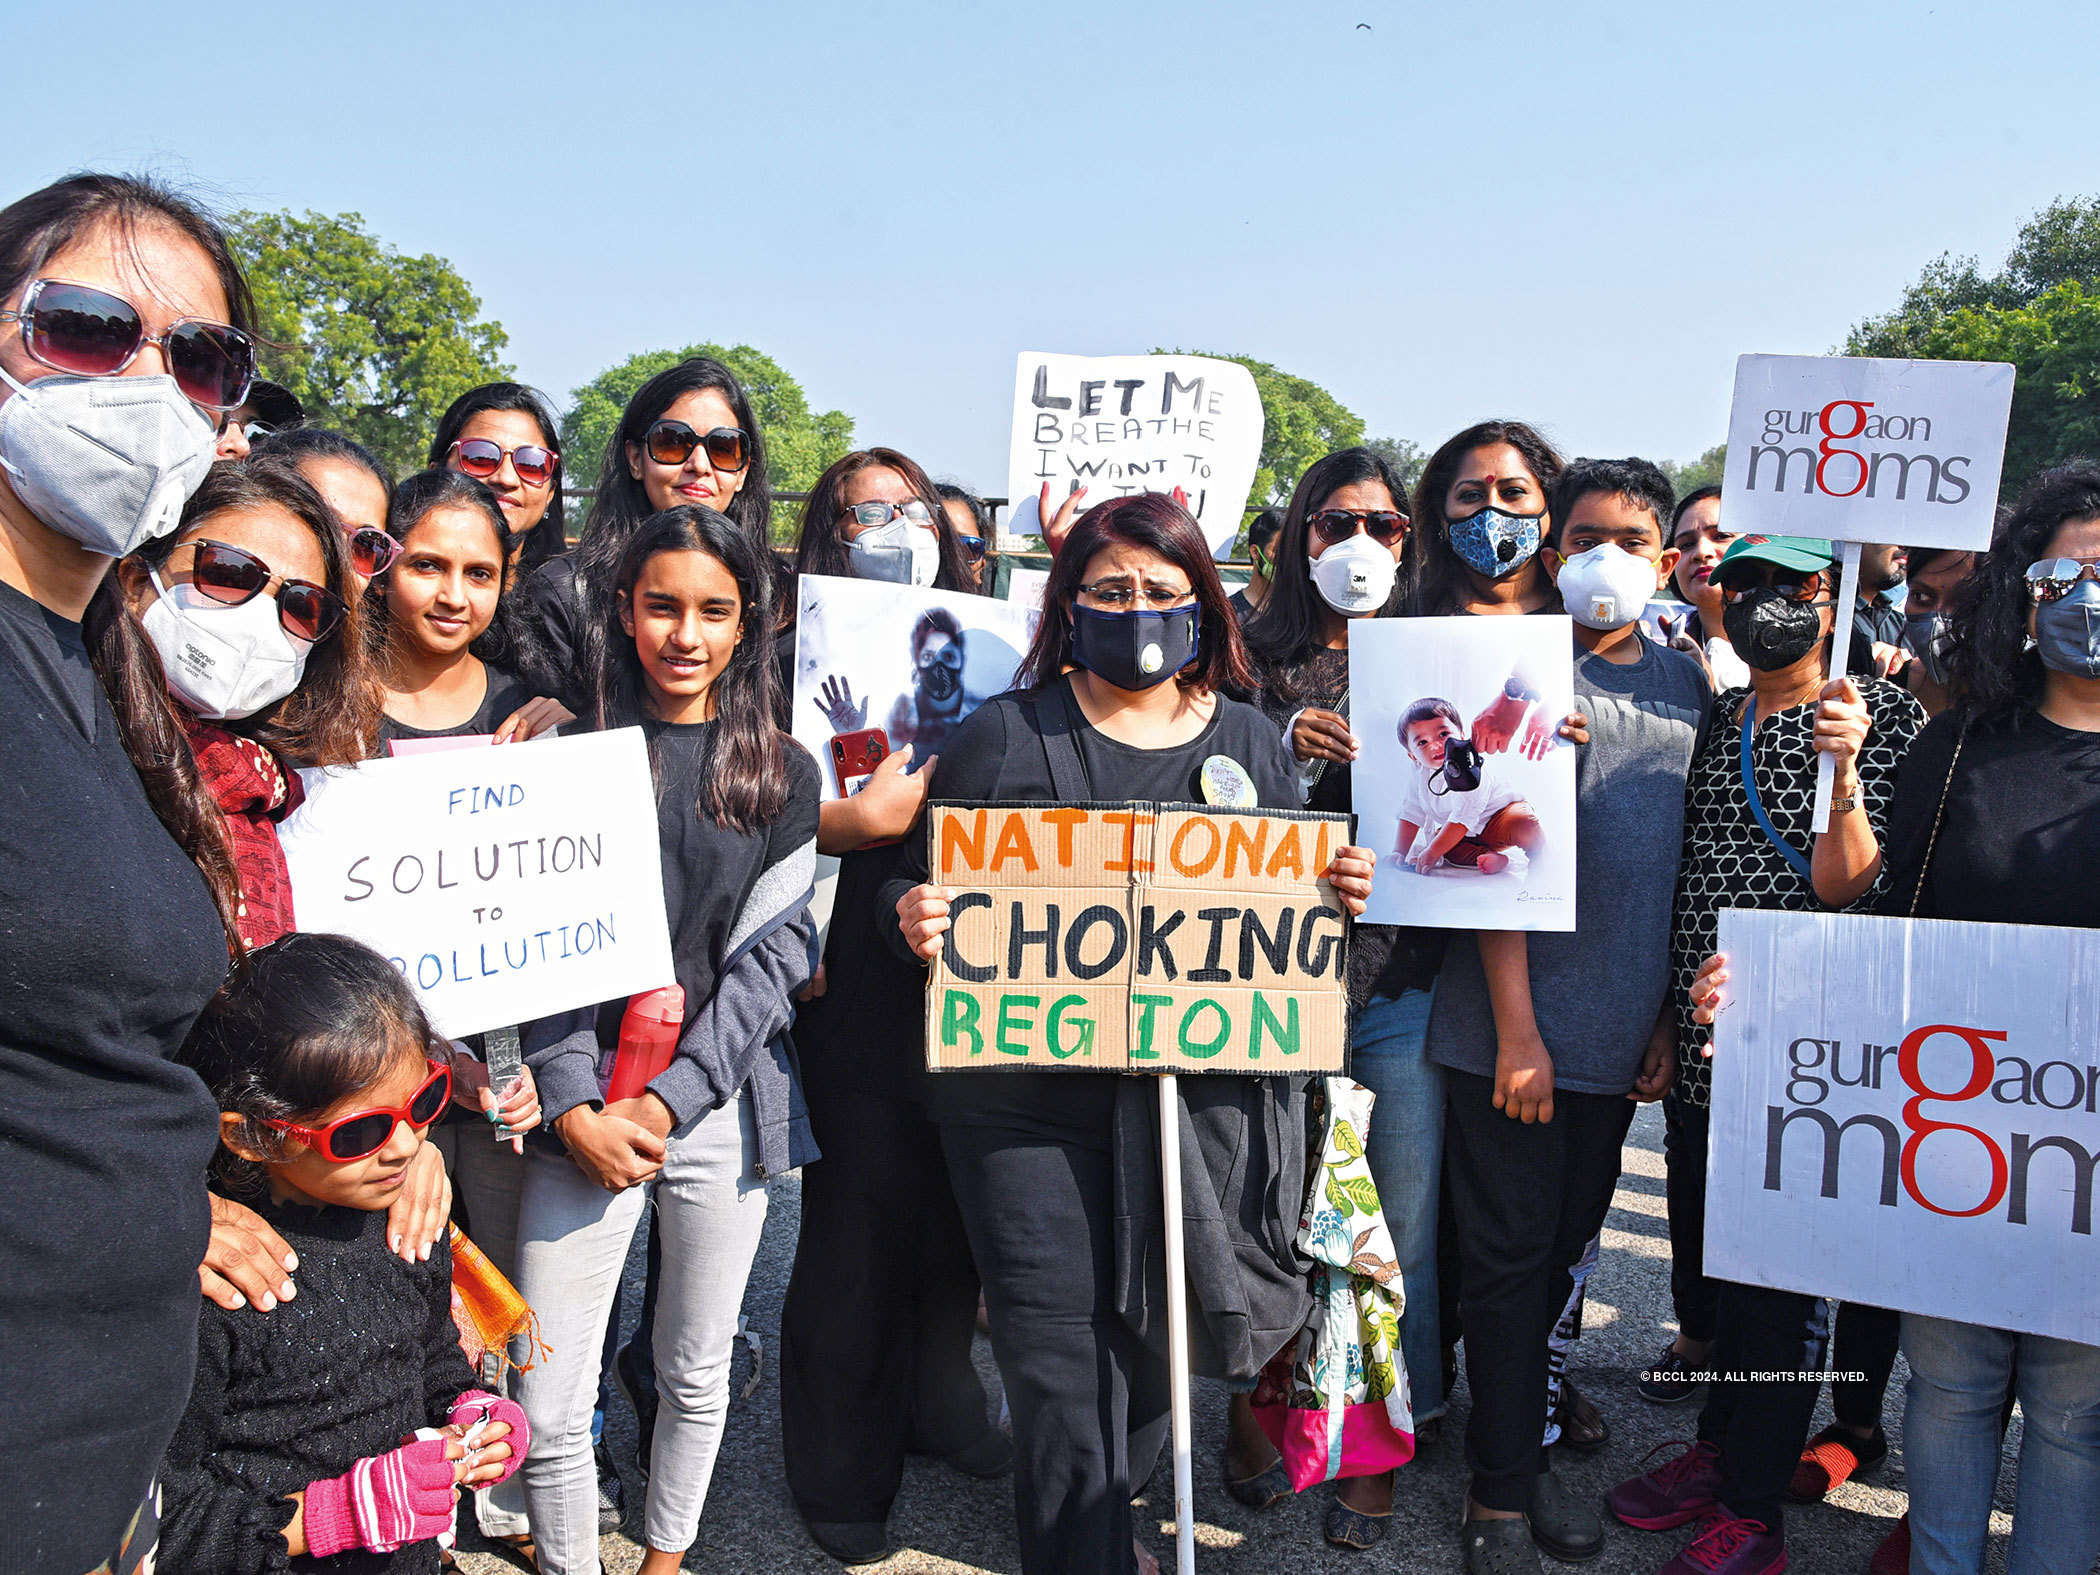 Sushant ‘Choke,’ Cyber ‘Huff’, Aravalli ‘Biogas’ Park: Climate protesters rename areas in Gurgaon